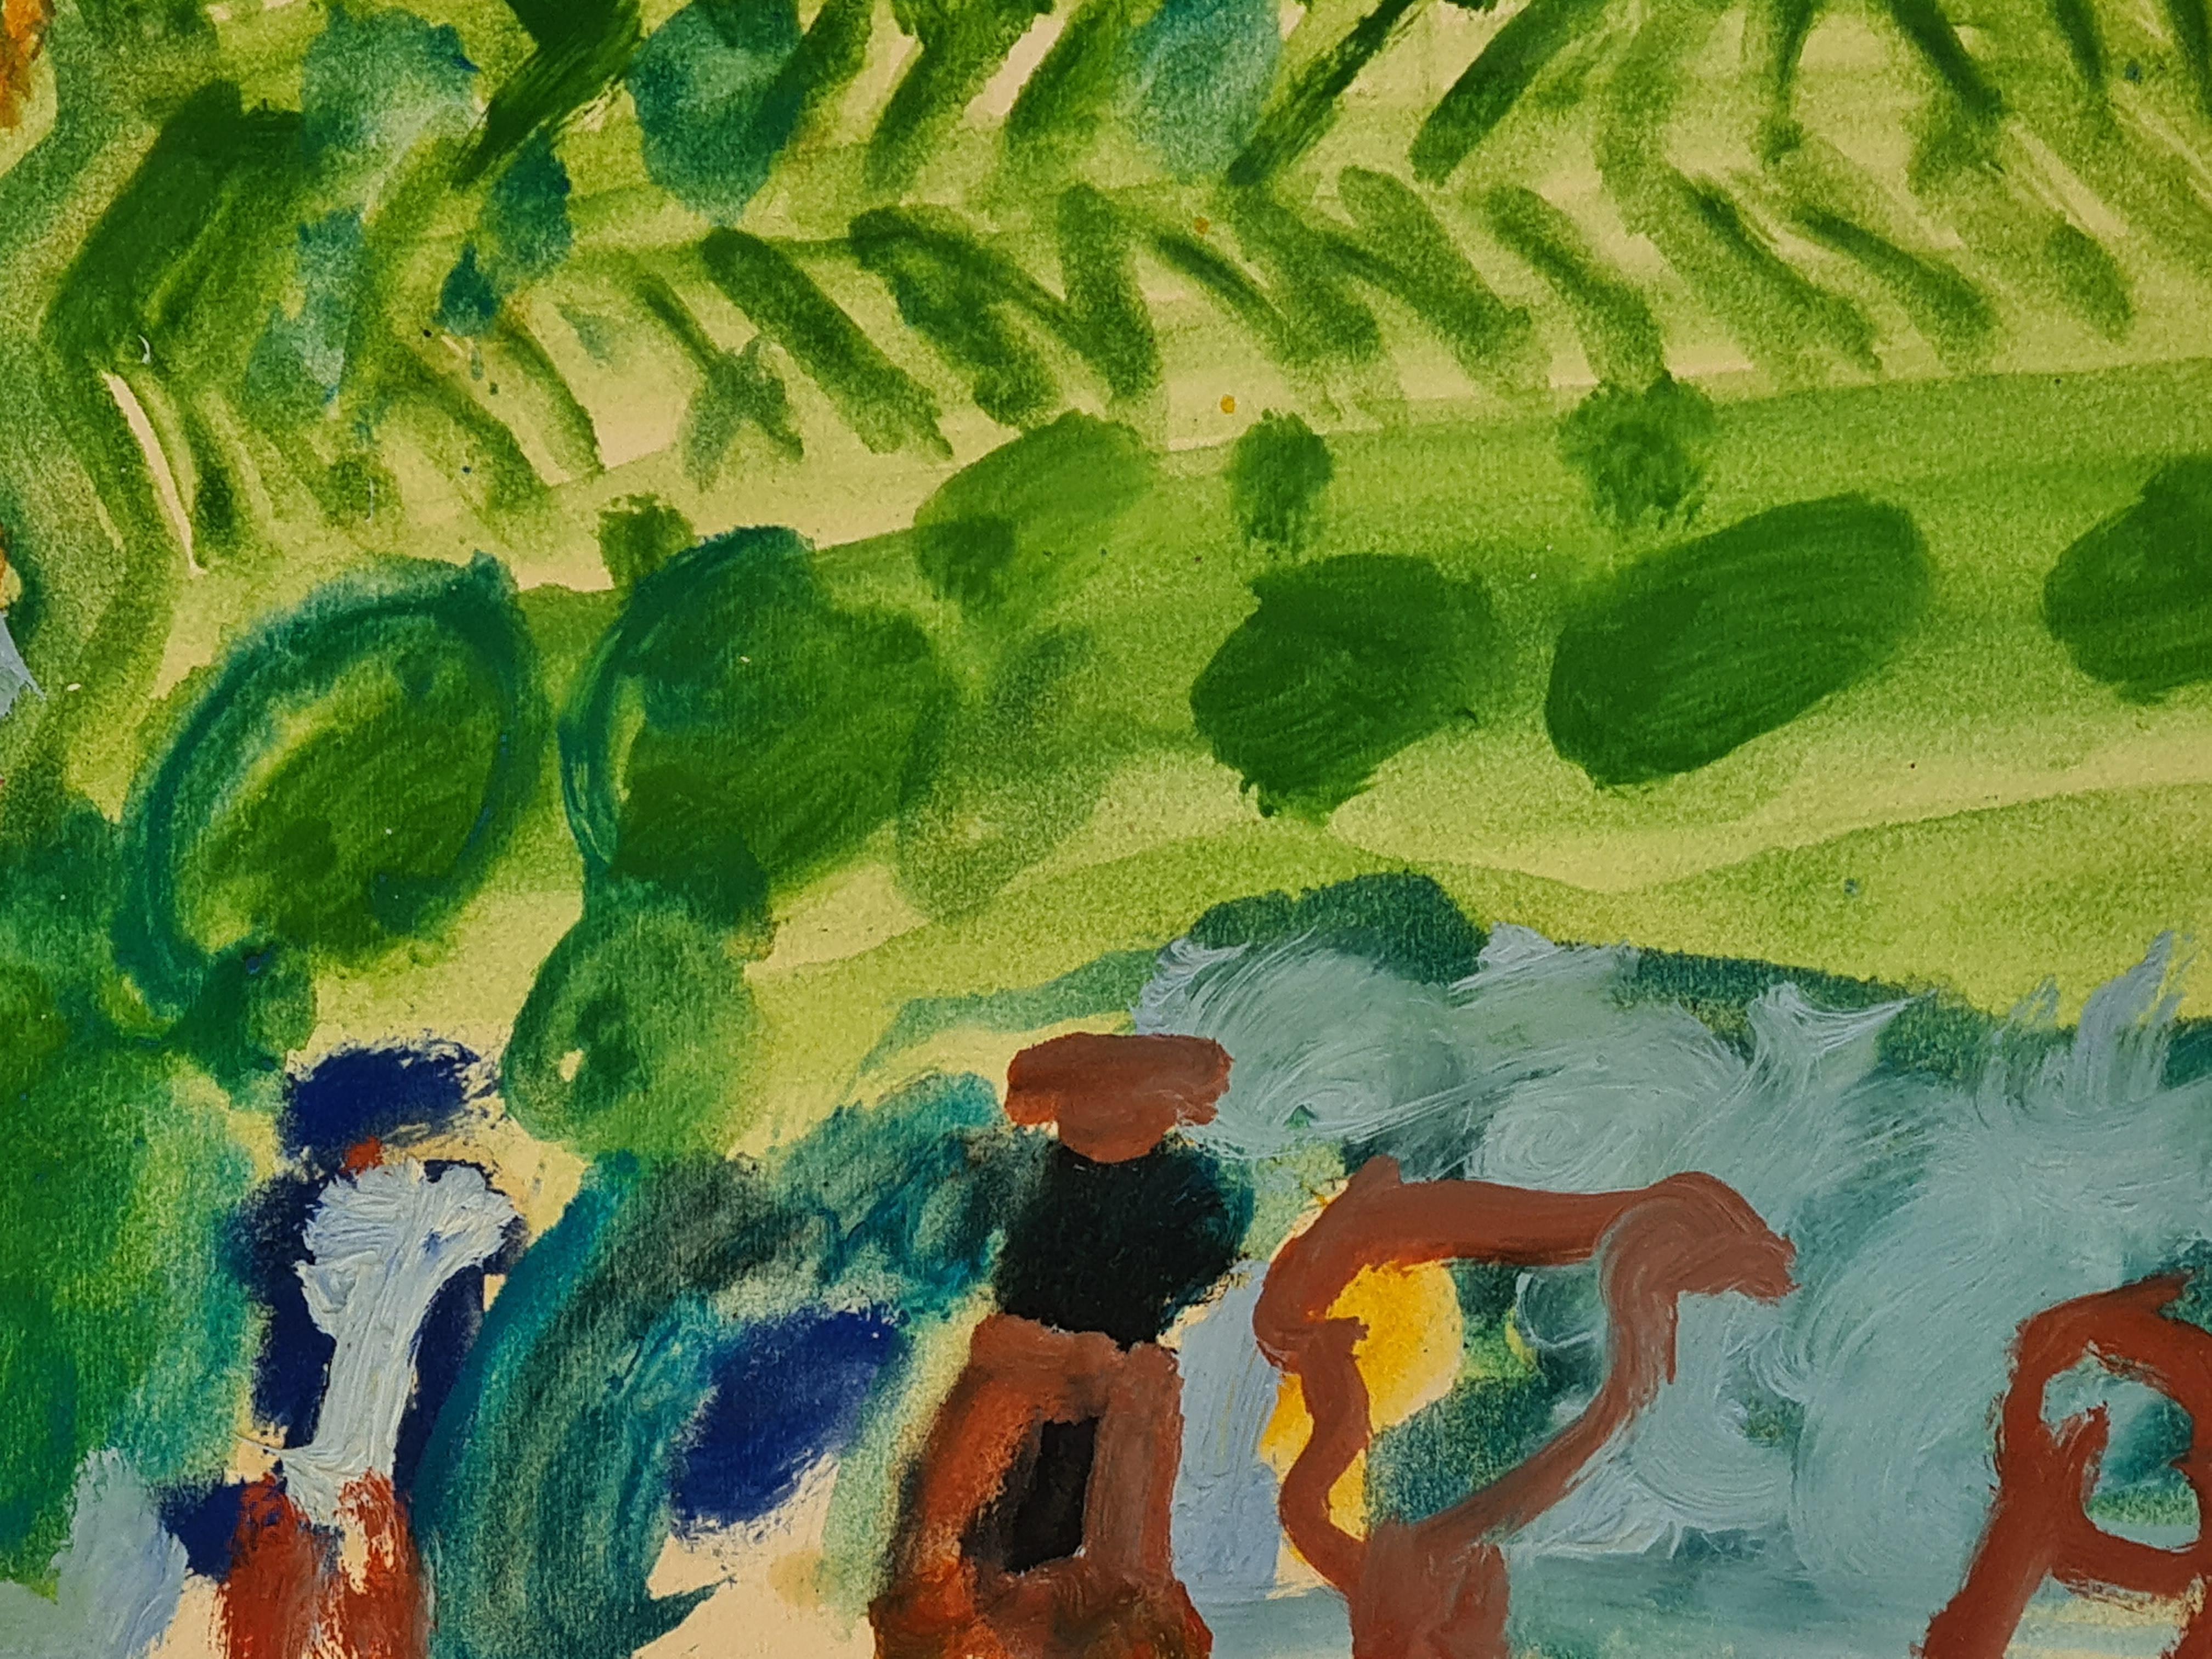 Colourful Mid Century Expressionist Work on Paper, La Mer à Cassis 1 - Green Landscape Painting by Armand Avril